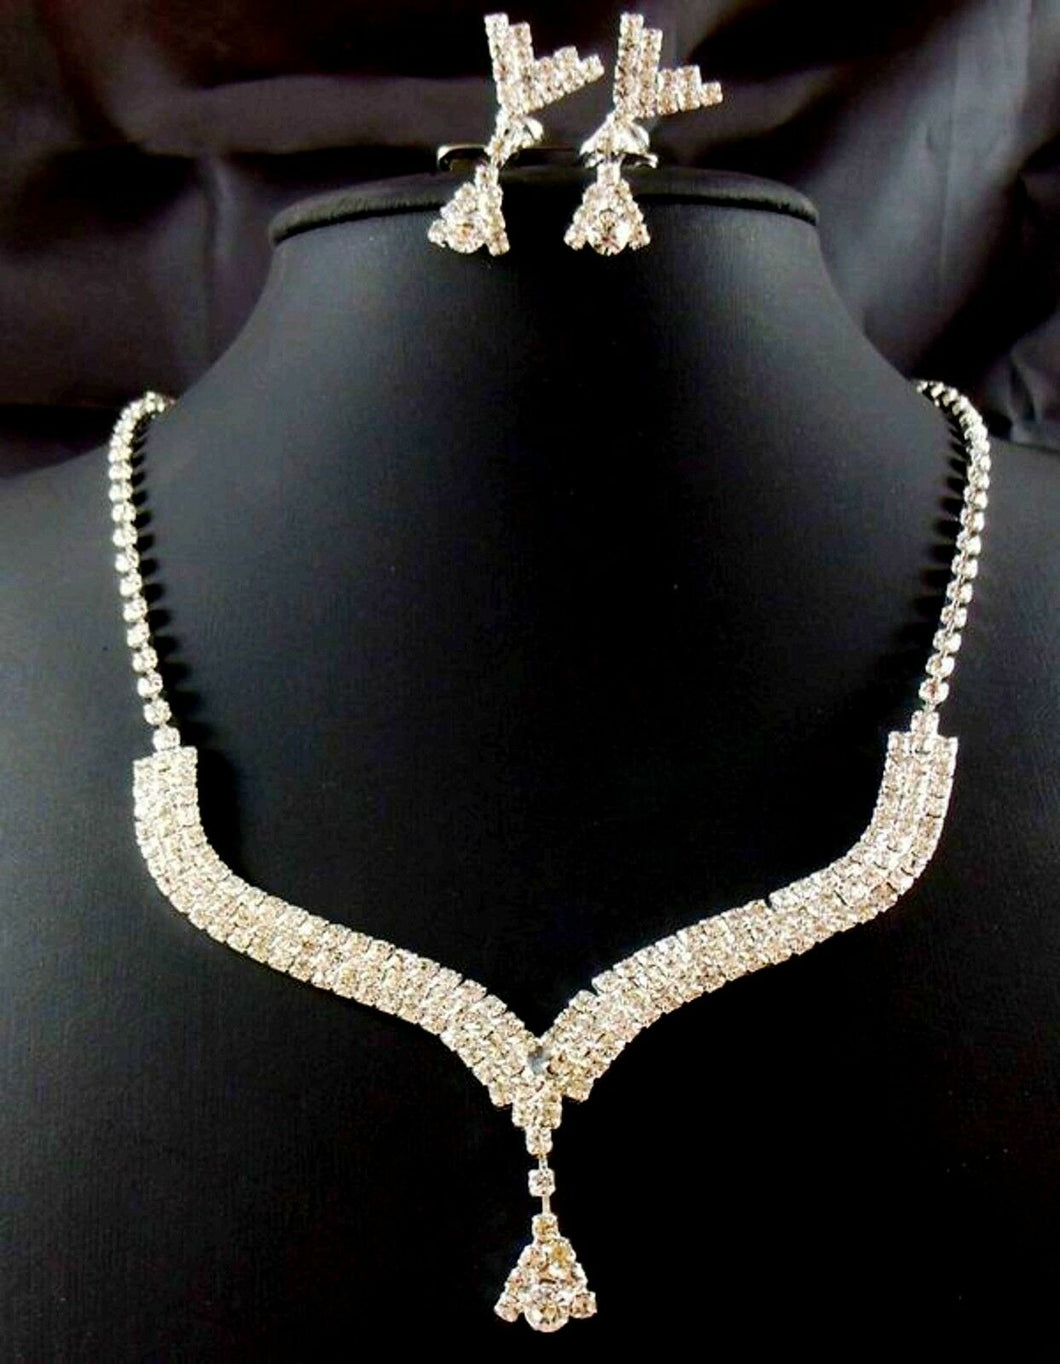 Women Girls Crystal Bling Shiny Wedding Bridal Bride Party Necklace Earrings Set